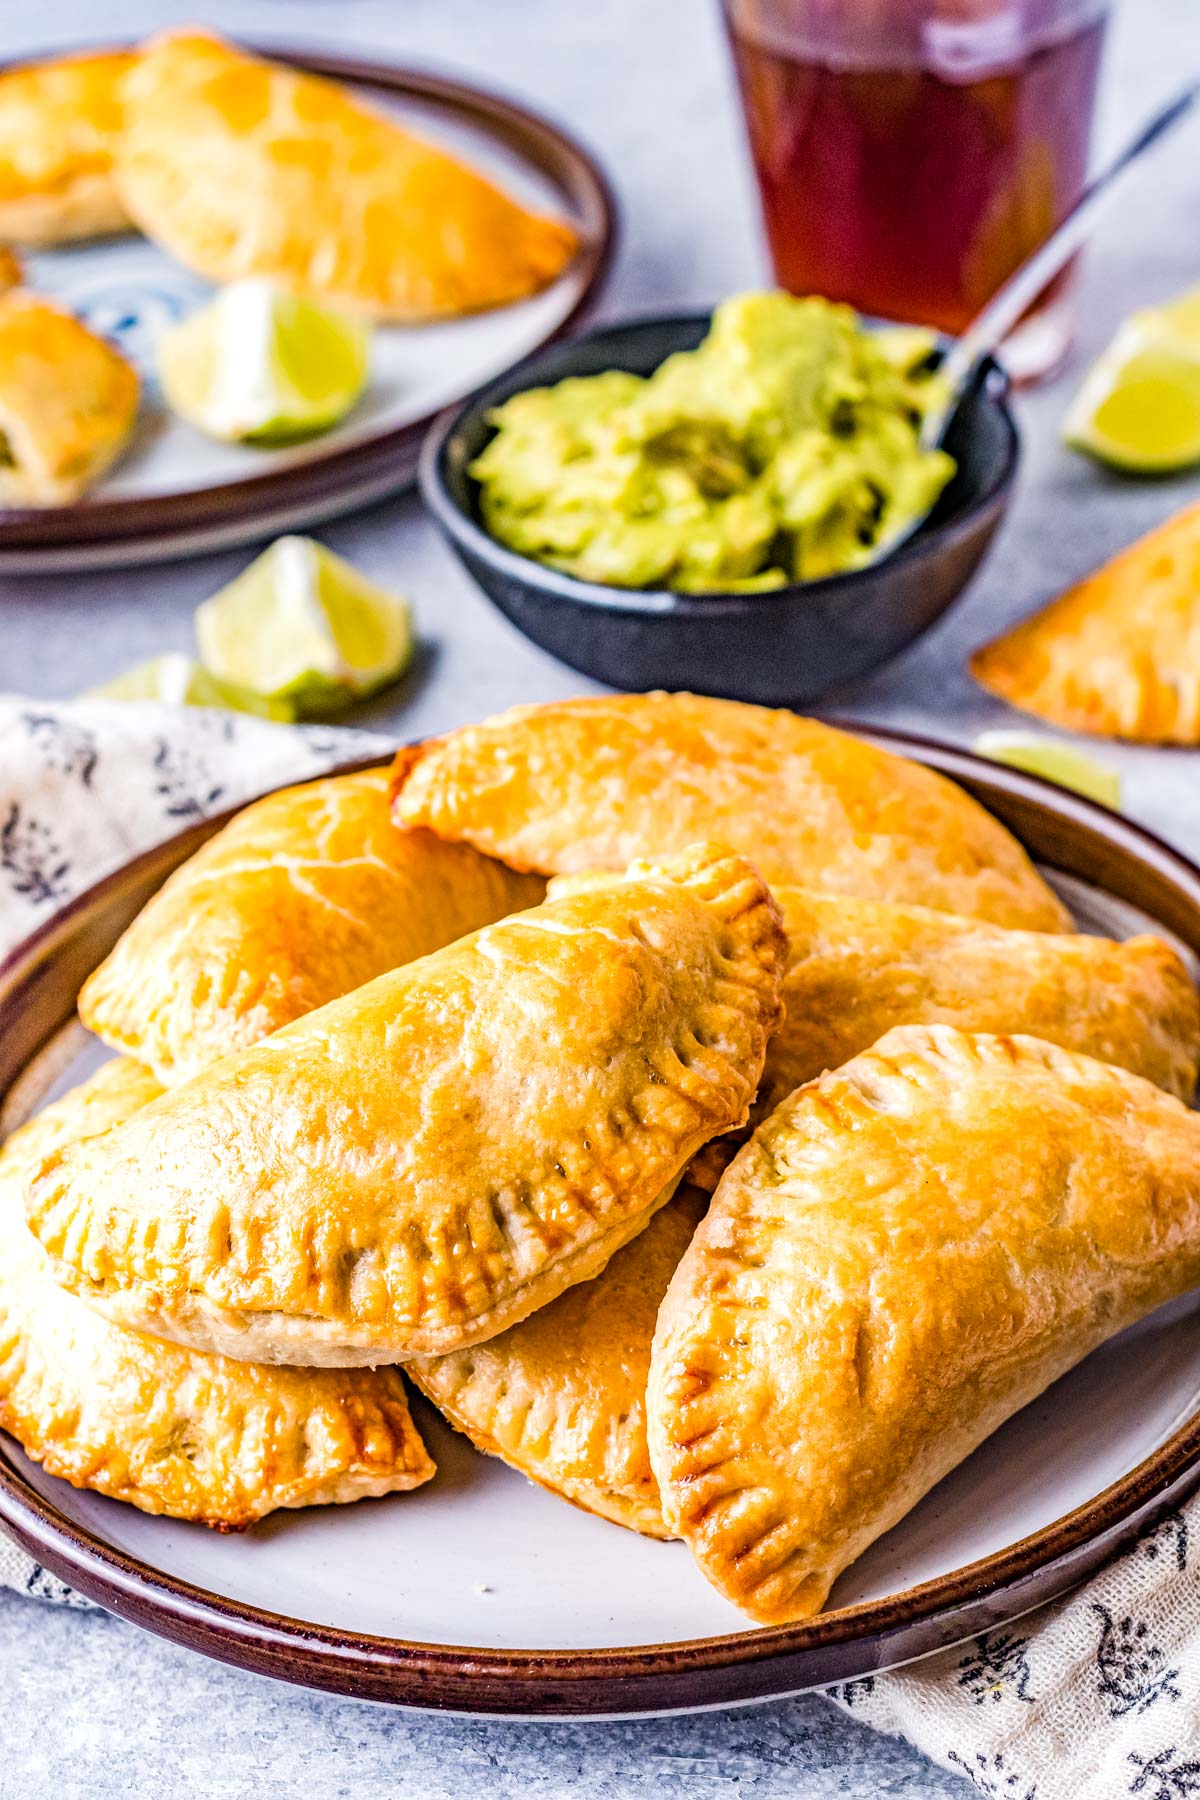 A pile of the finished Vegetarian Empanadas with some guacamole nearby.